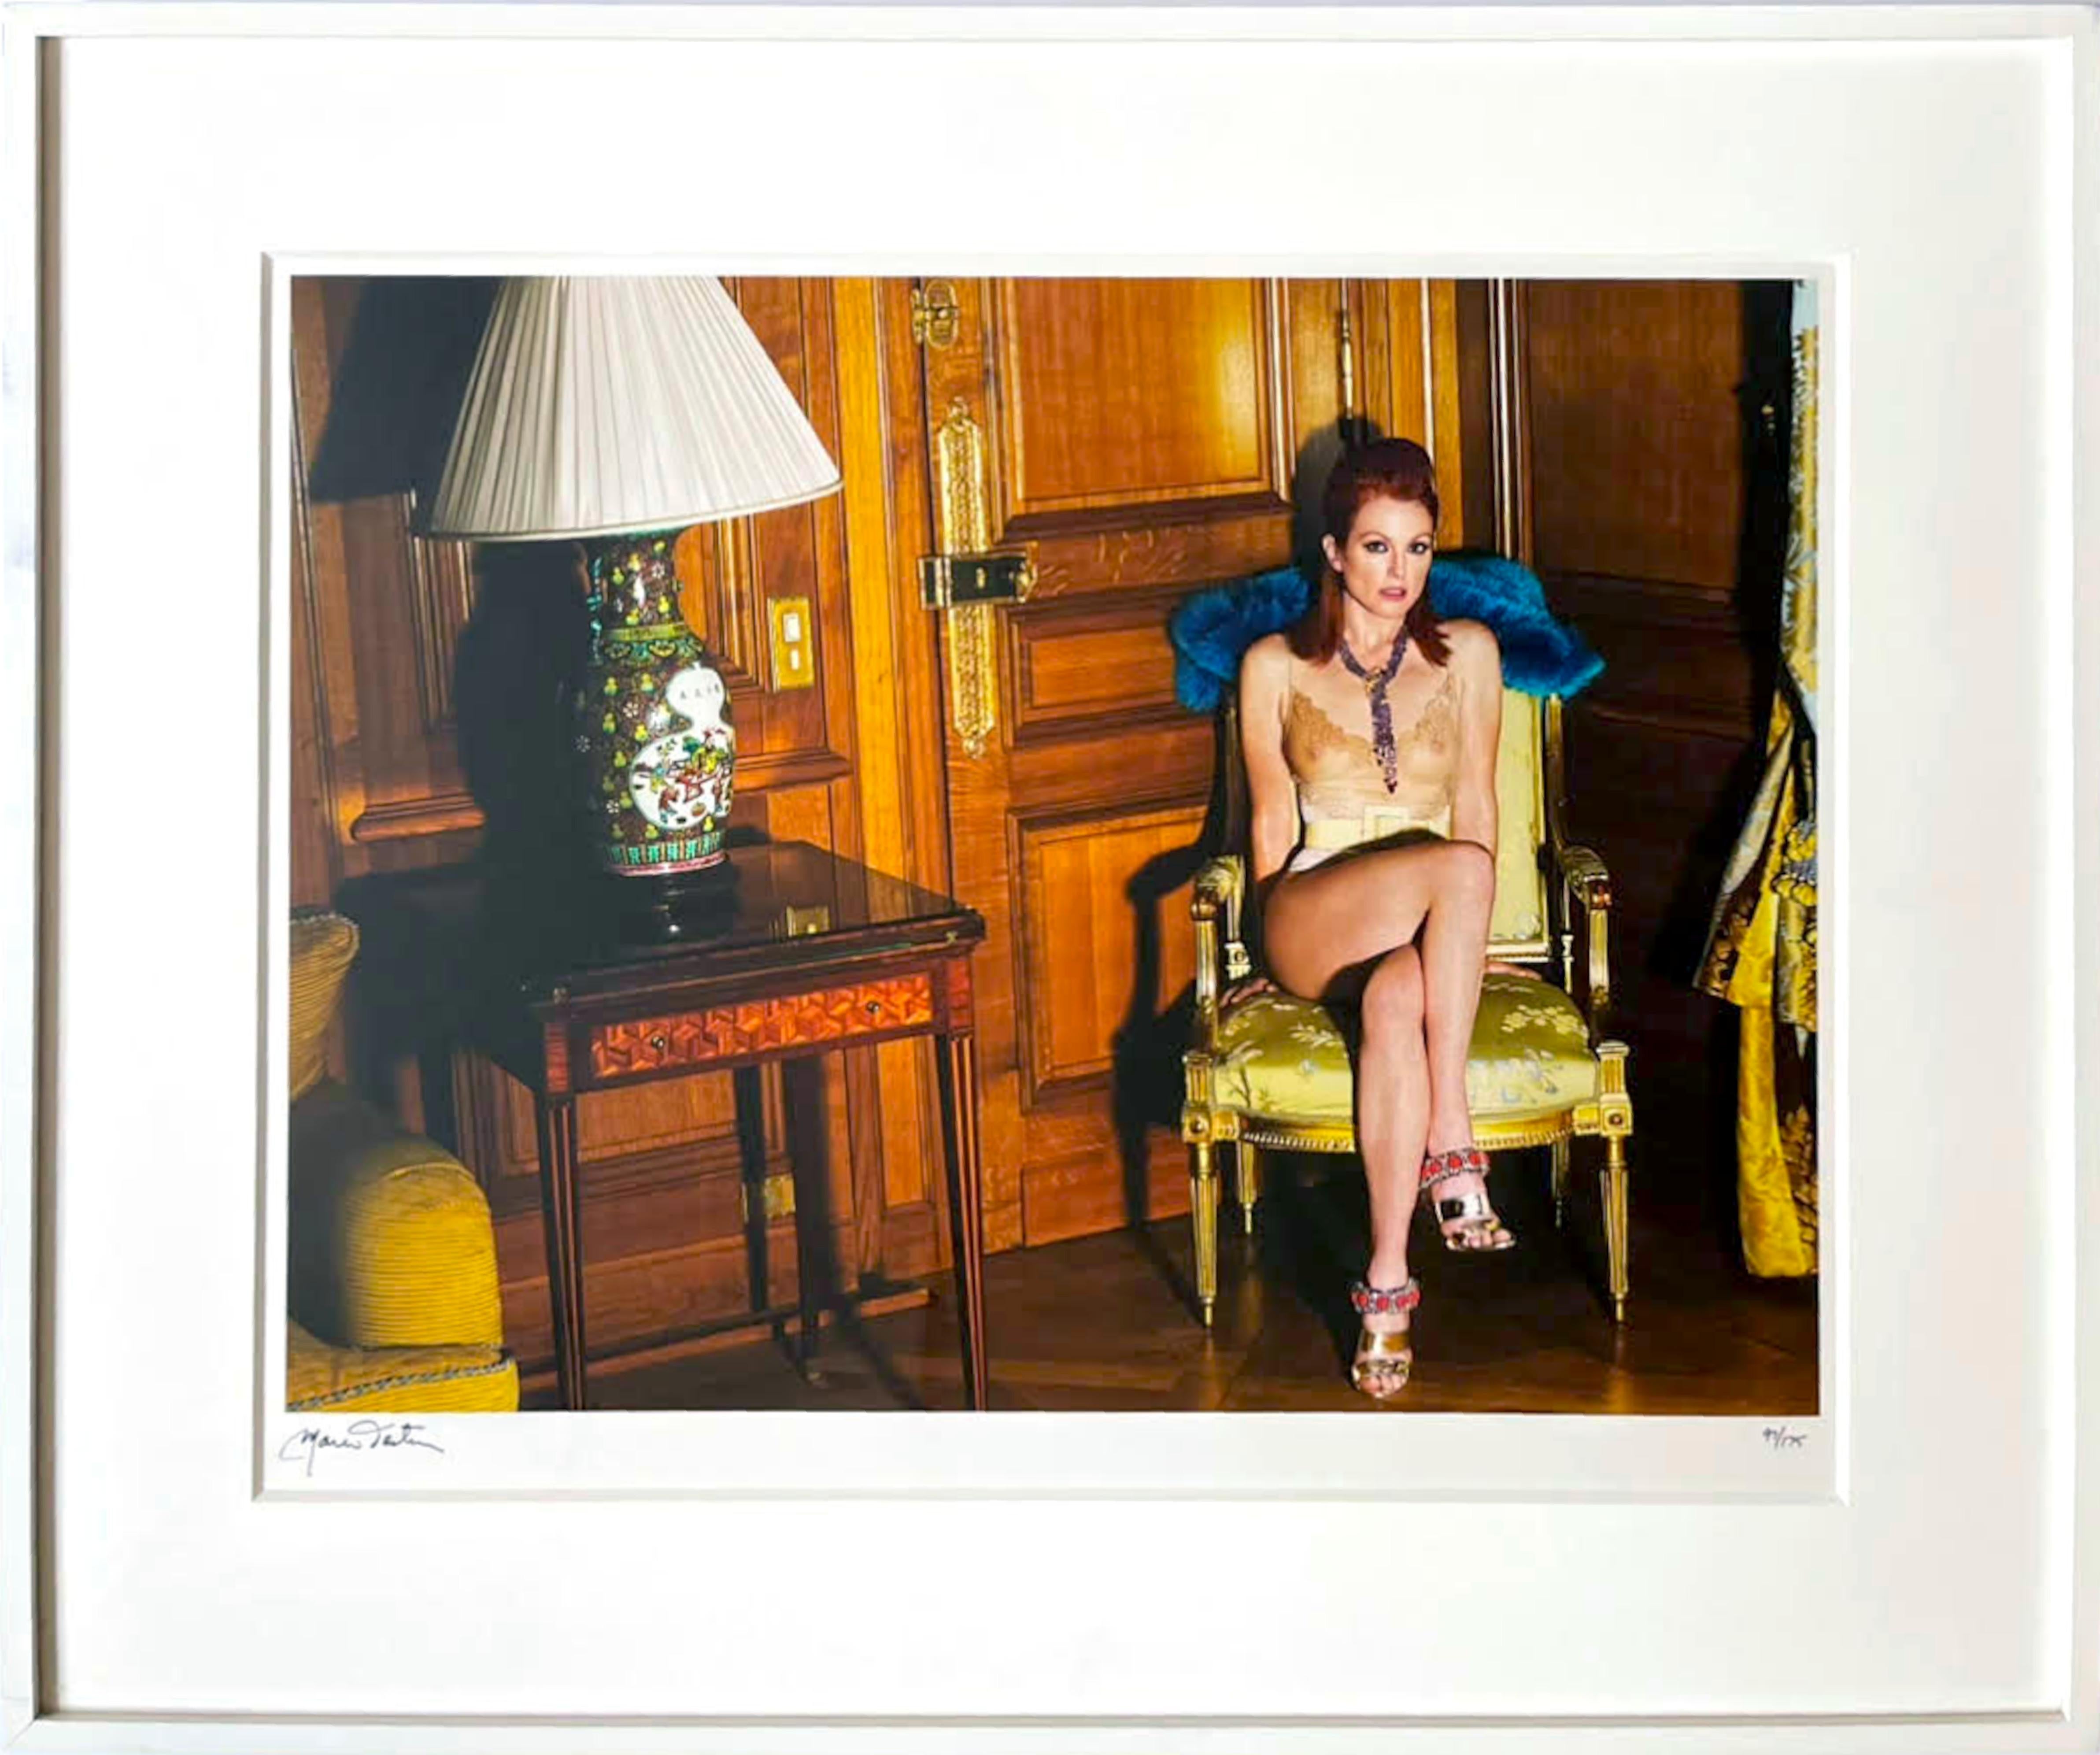 Julianne Moore at the Crillon Hotel, Paris 2008 Signed/N C-Print Lt. Ed. Framed - Photograph by Mario Testino